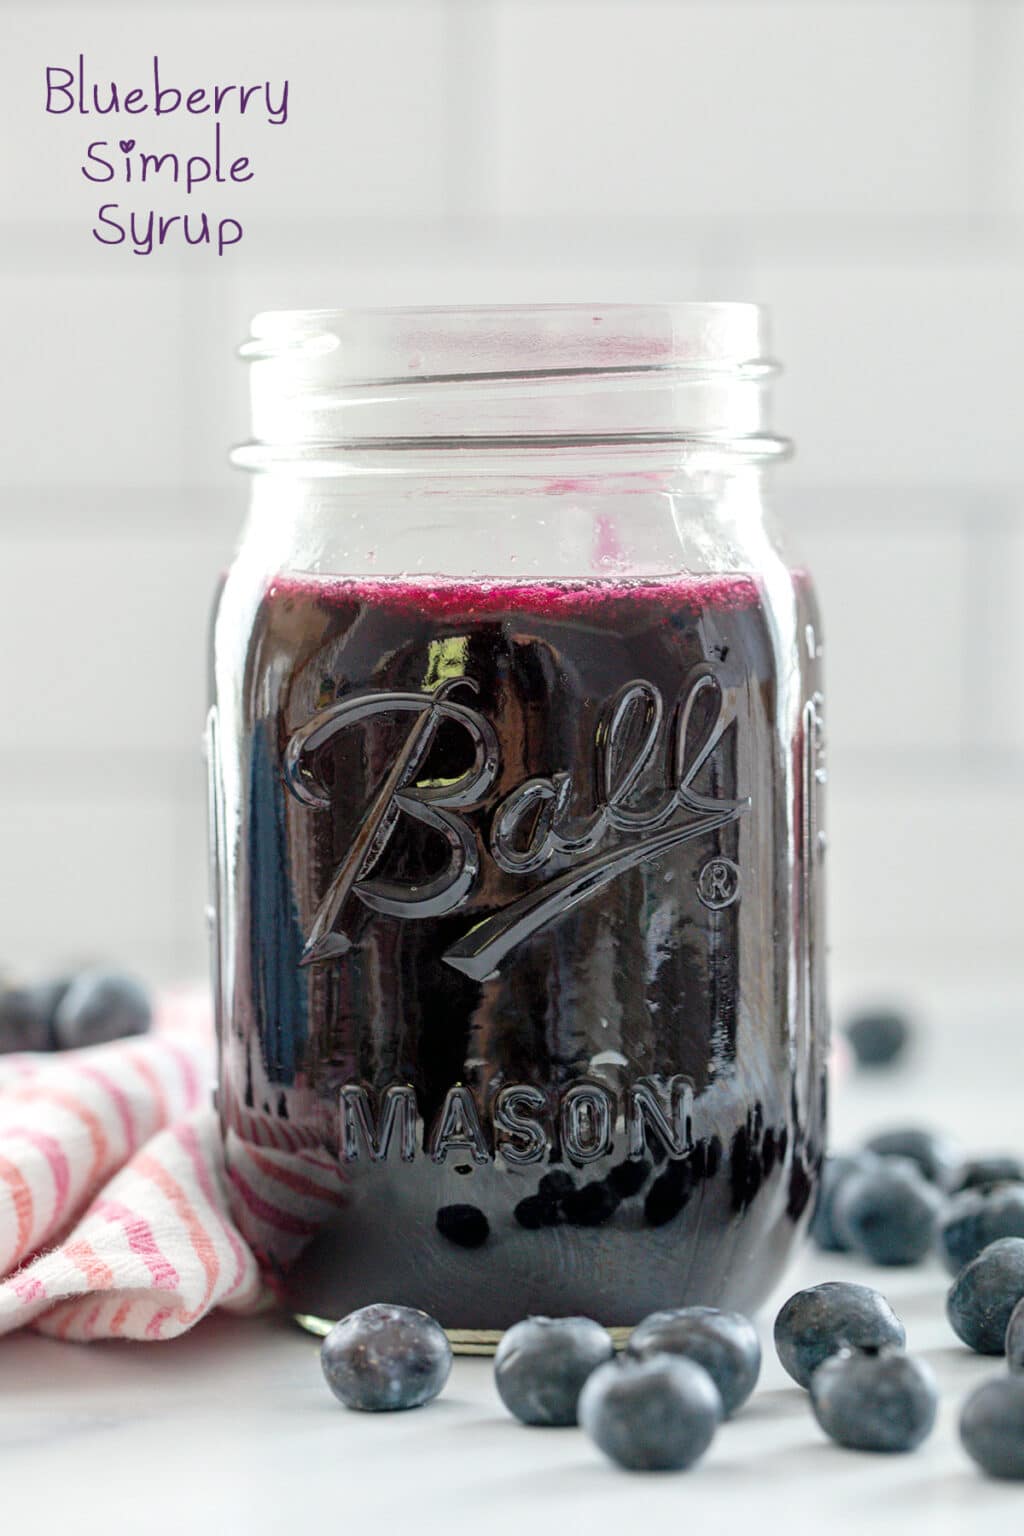 Blueberry Simple Syrup Recipe | We are not Martha